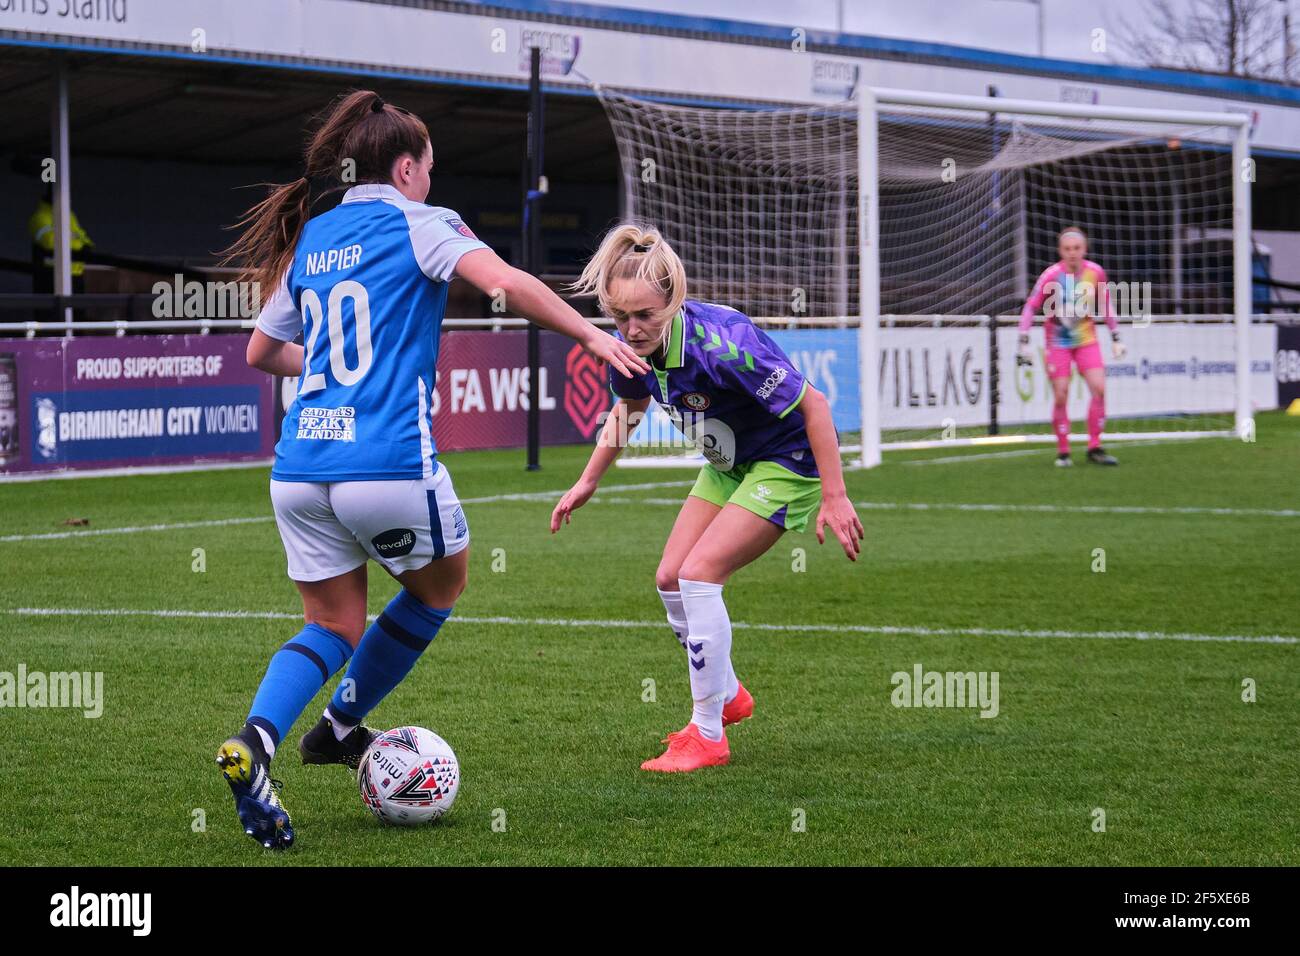 Solihull, UK. 28th Mar, 2021. Jamie-Lee Napier (#20 Birmingham City) taking on Faye Bryson (#2 Bristol City) during the FA Women's Super League match between Birmingham City and Bristol City at SportNation.bet Stadium in Solihull, England. Credit: SPP Sport Press Photo. /Alamy Live News Stock Photo